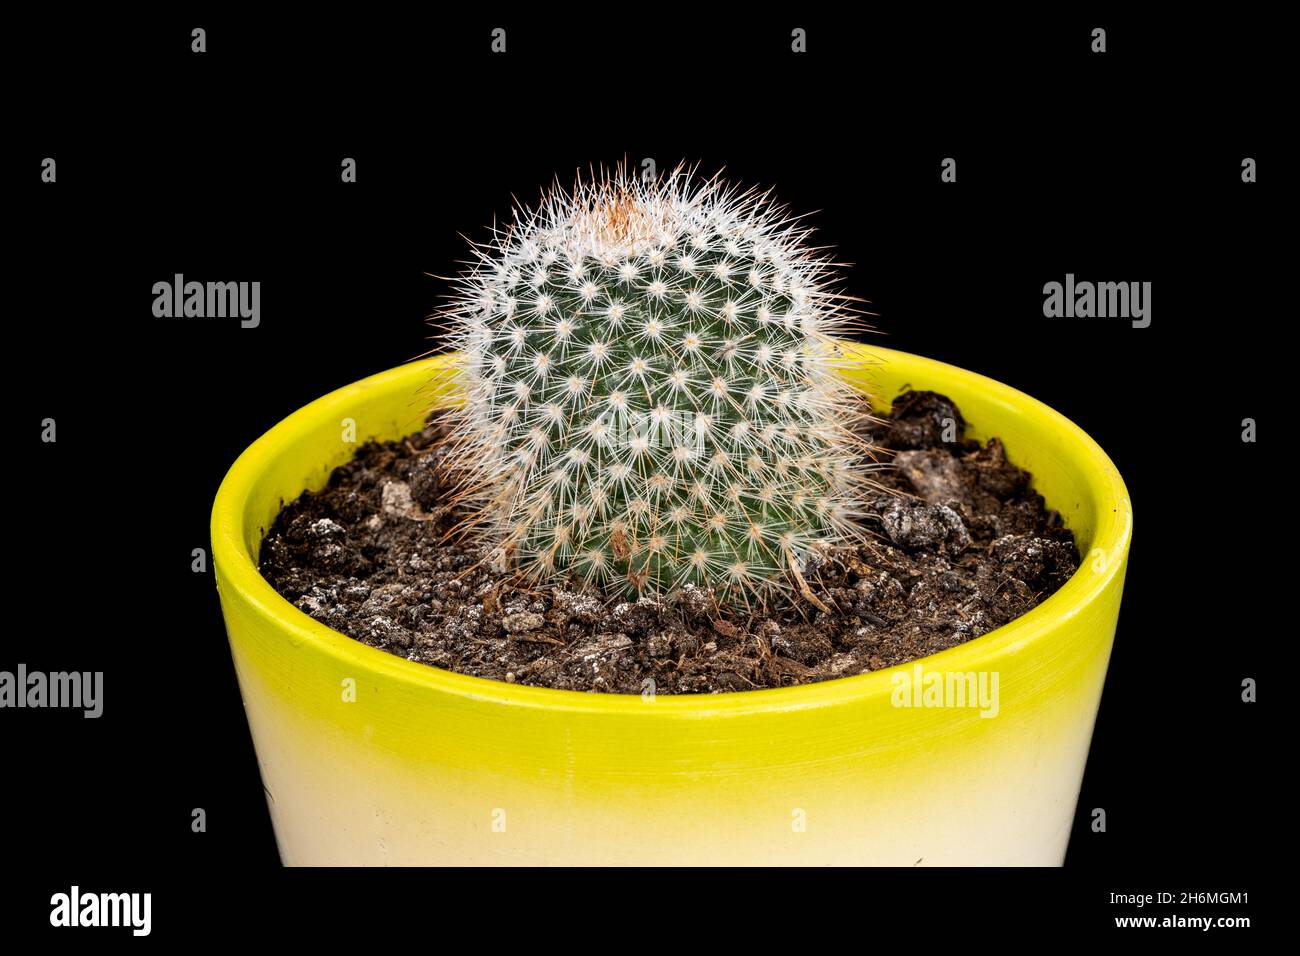 Cactus flower in a white flower pot. Growing plants in pots for home and garden decoration. Isolated black background Stock Photo